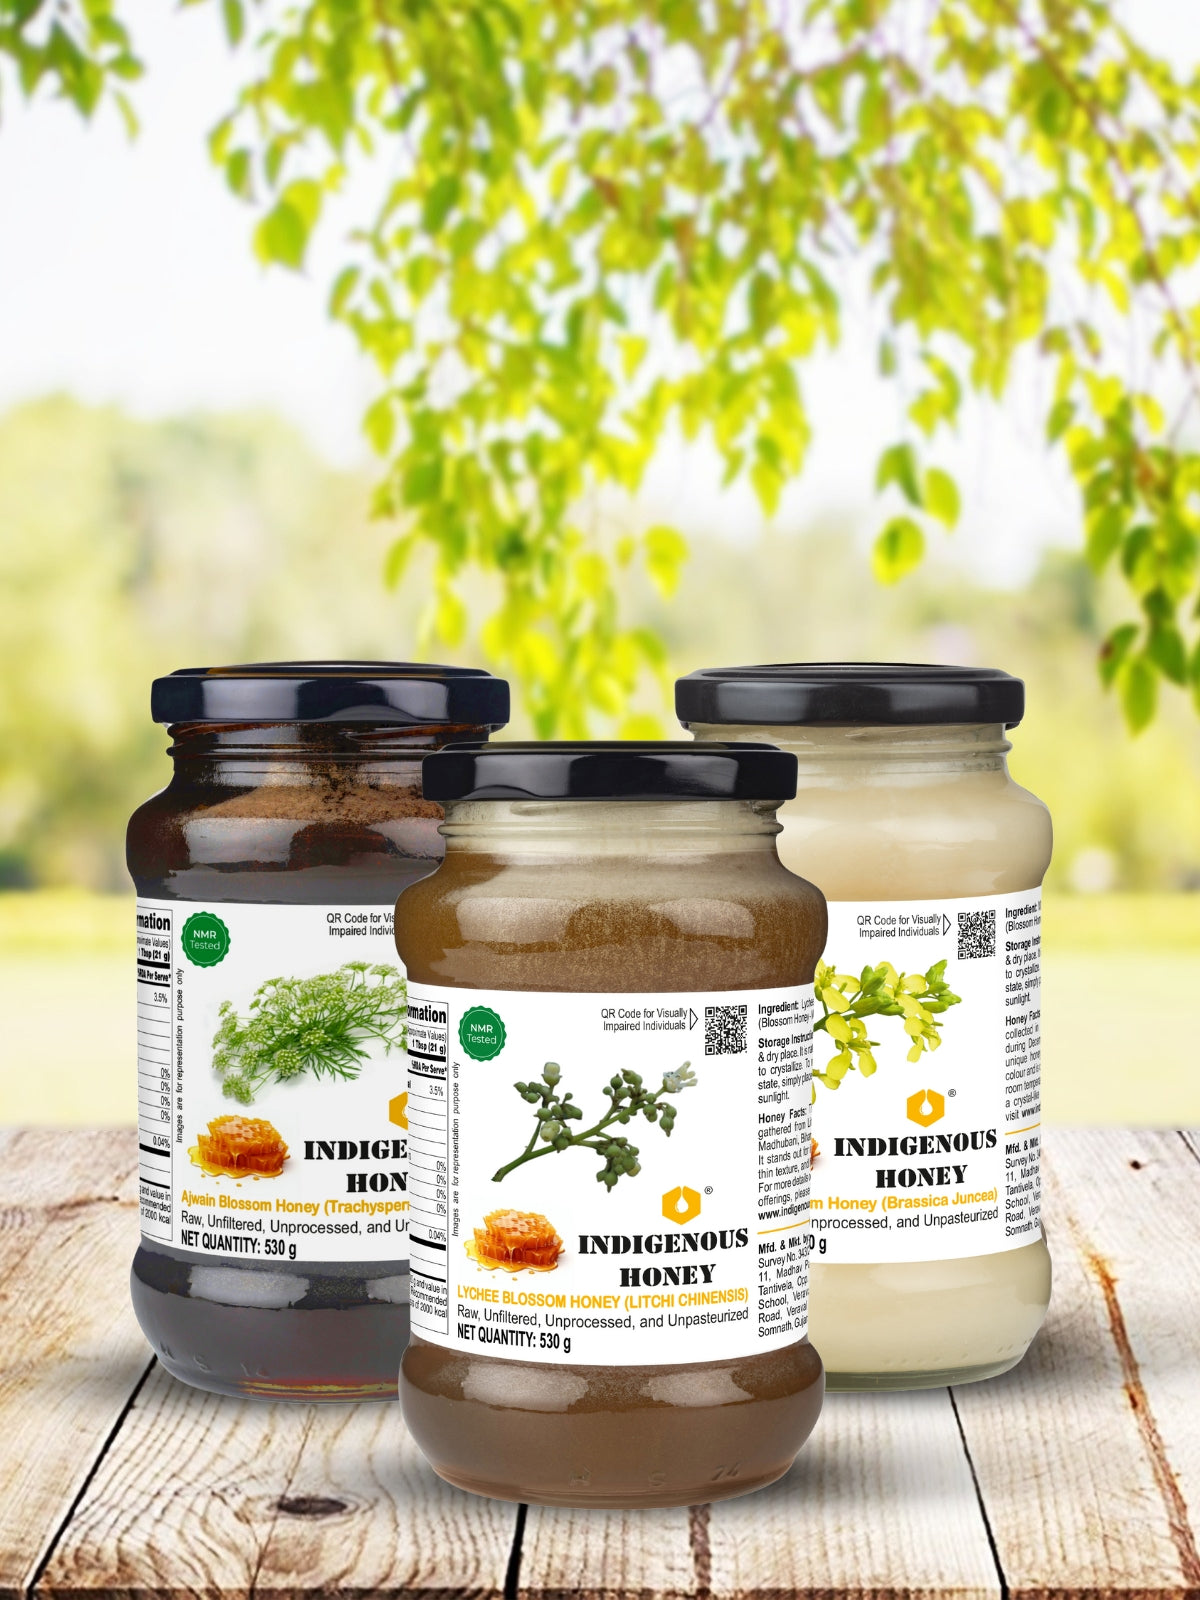 Pure and Natural honey from Indigenous Honey